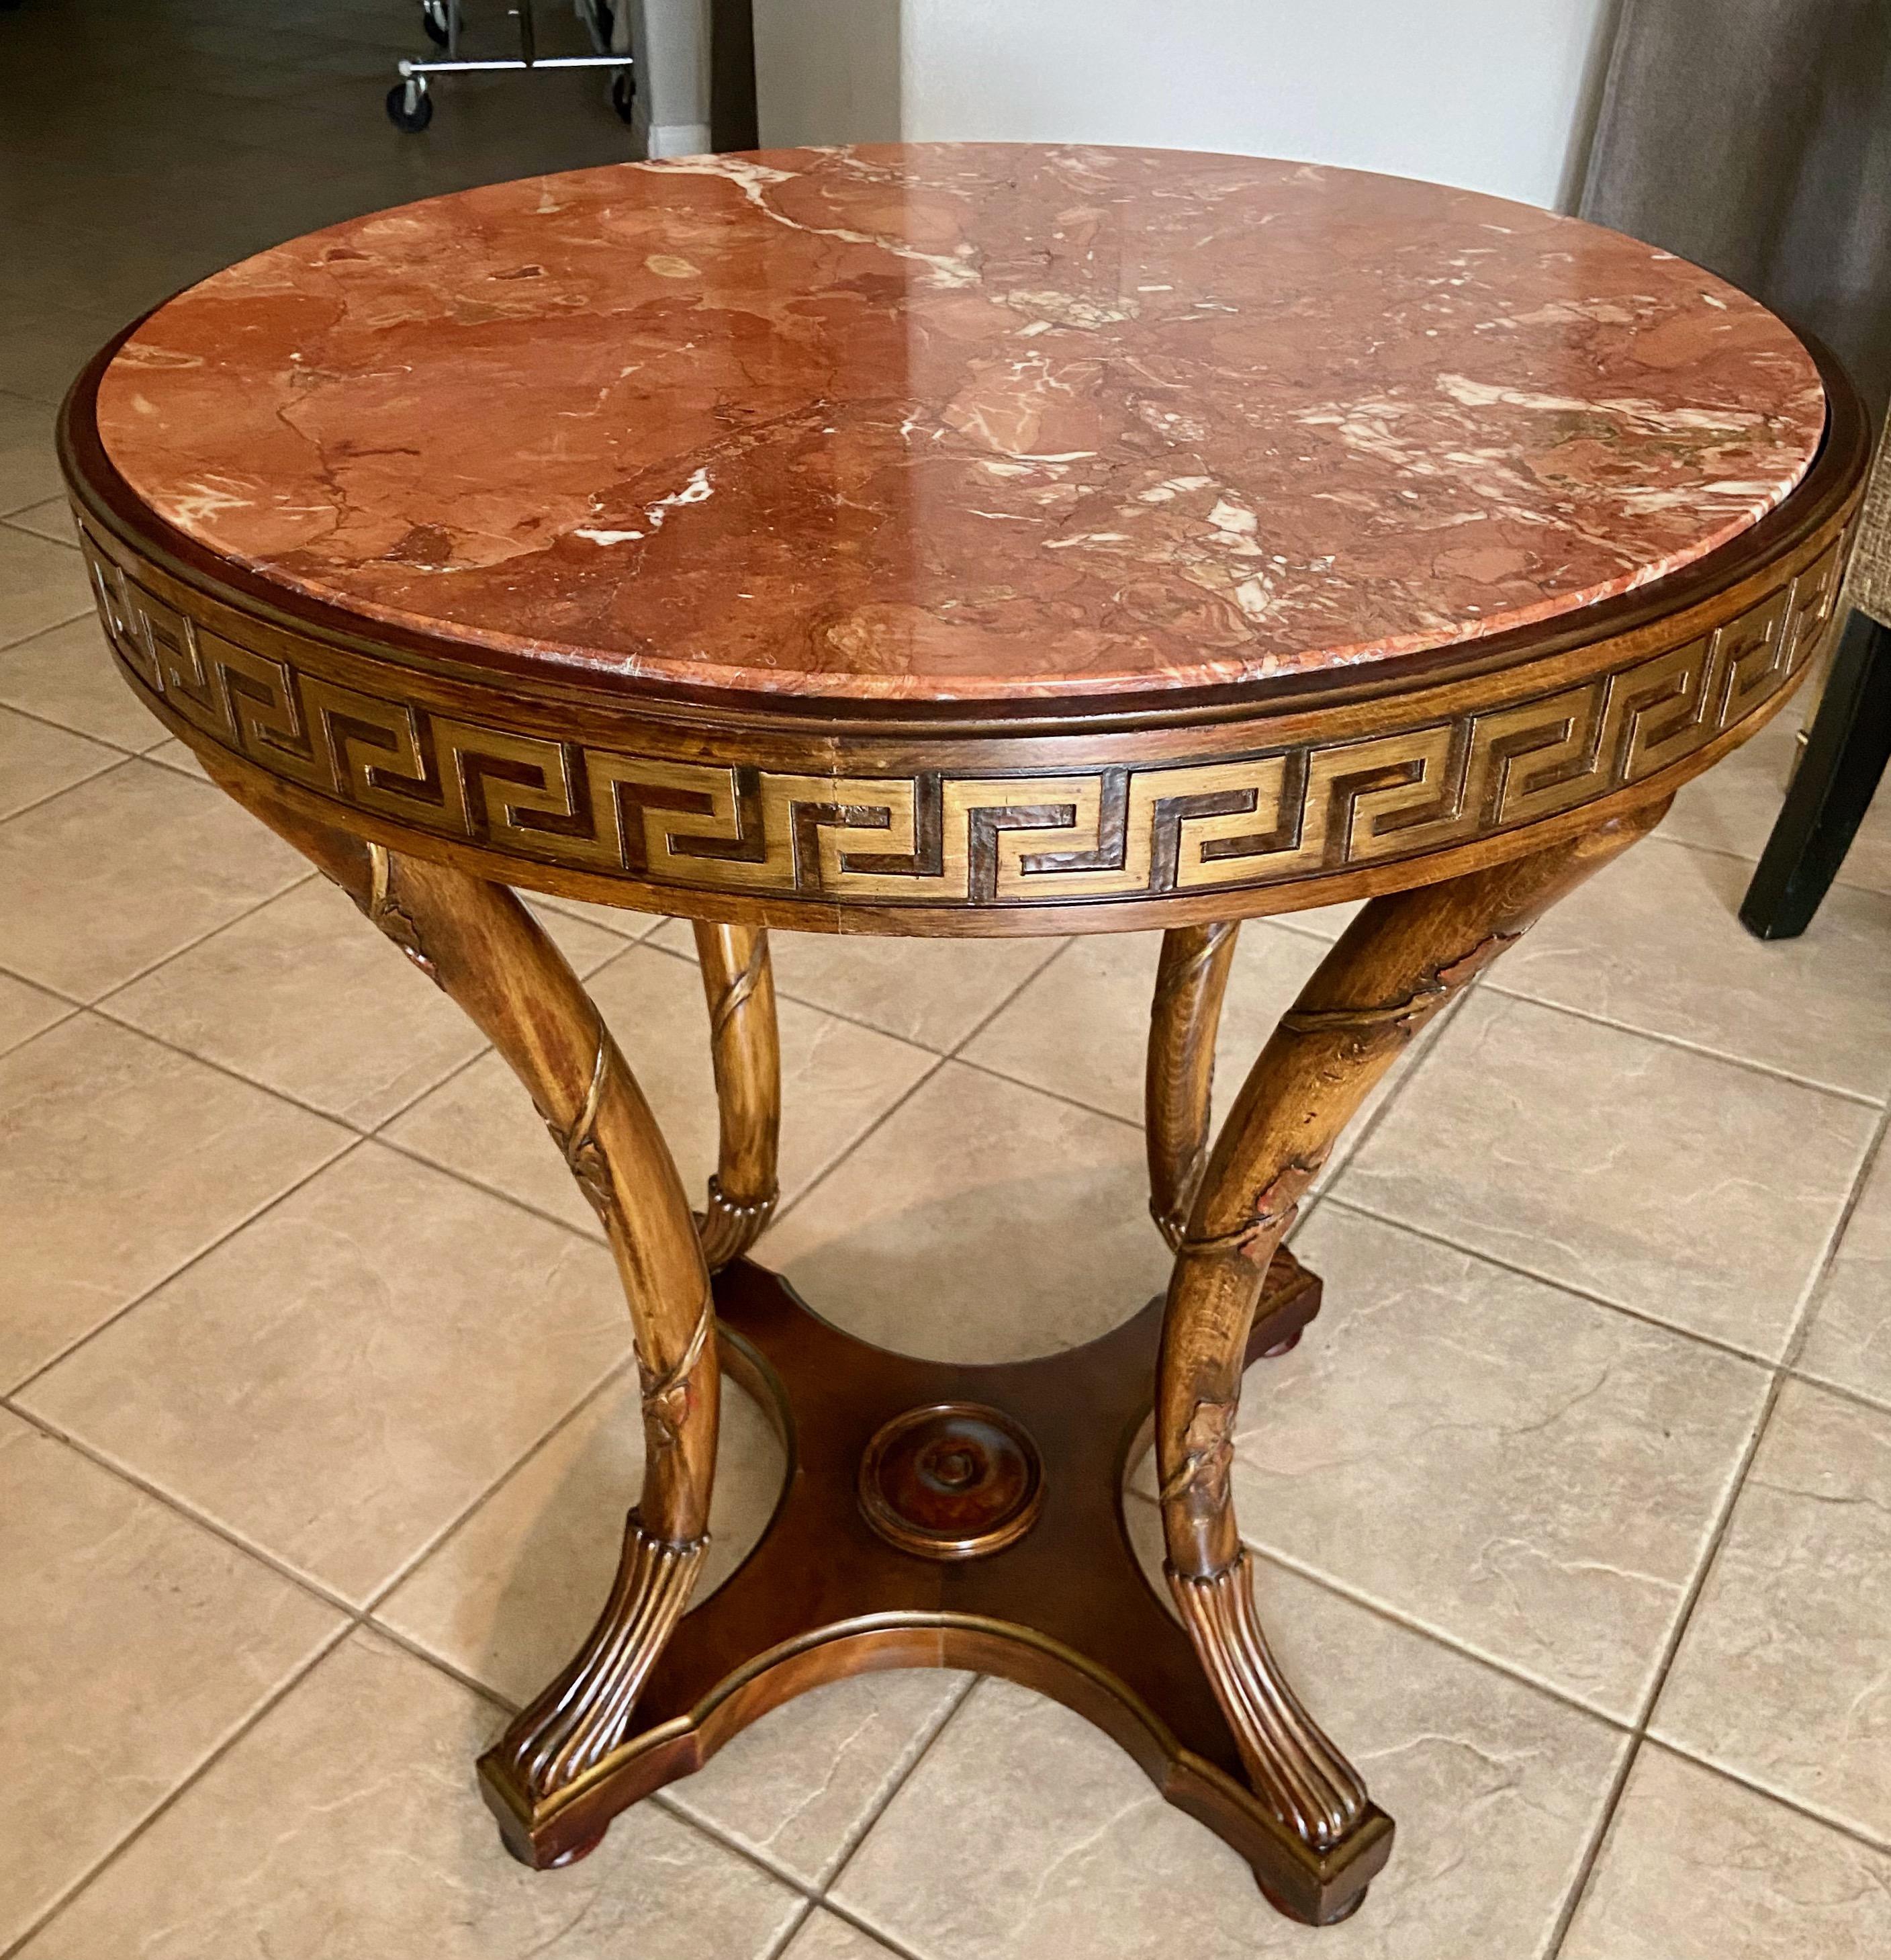 French neoclassical style round 4 leg lacquered wood gueridon or side table with inset marble top. The table has nice detailing throughout including a circular greek key carved boarder, and is supported by 4 curved saber paw footed legs decorated